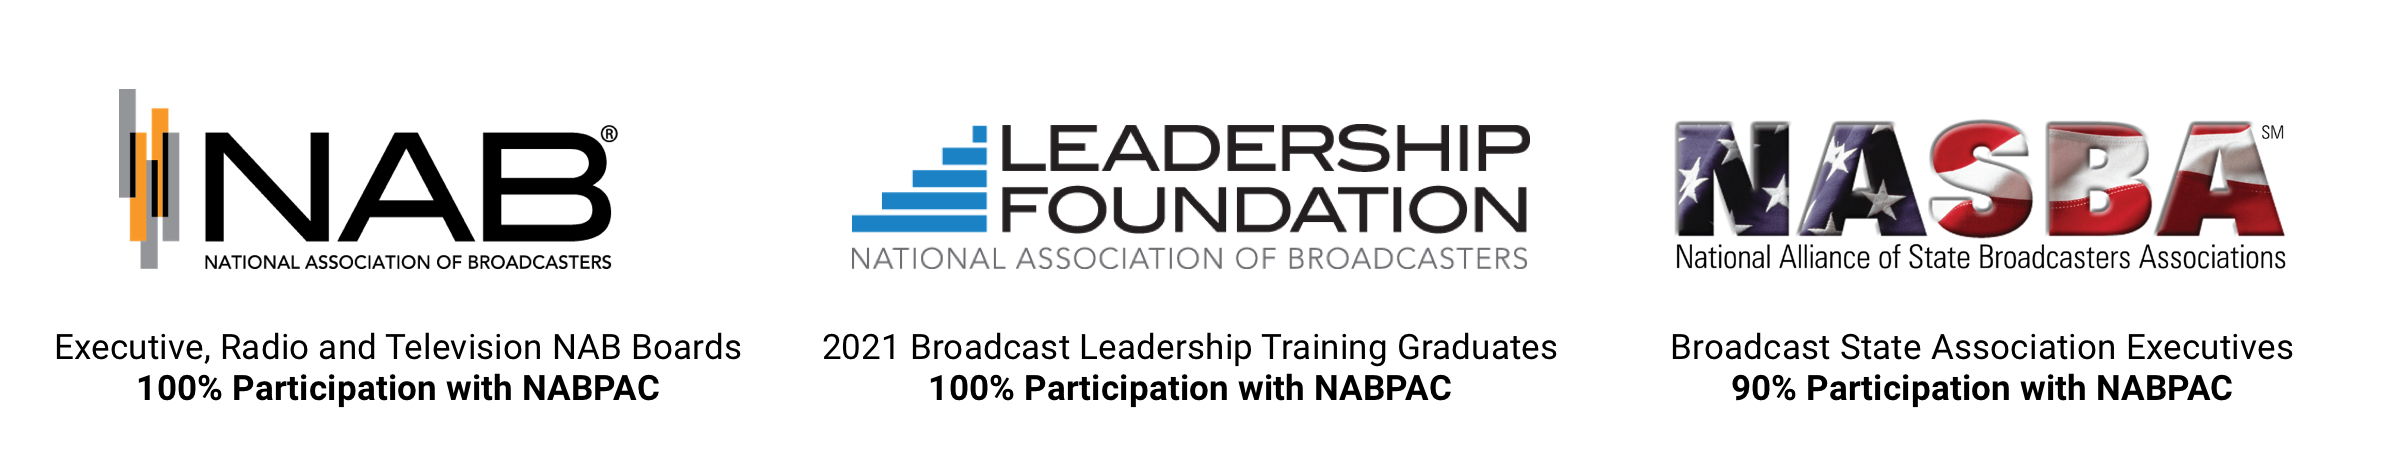 Special thanks to NAB, NAB Leadership Foundation and the National Alliance of State Broadcasters Association for their participation and support of NABPAC